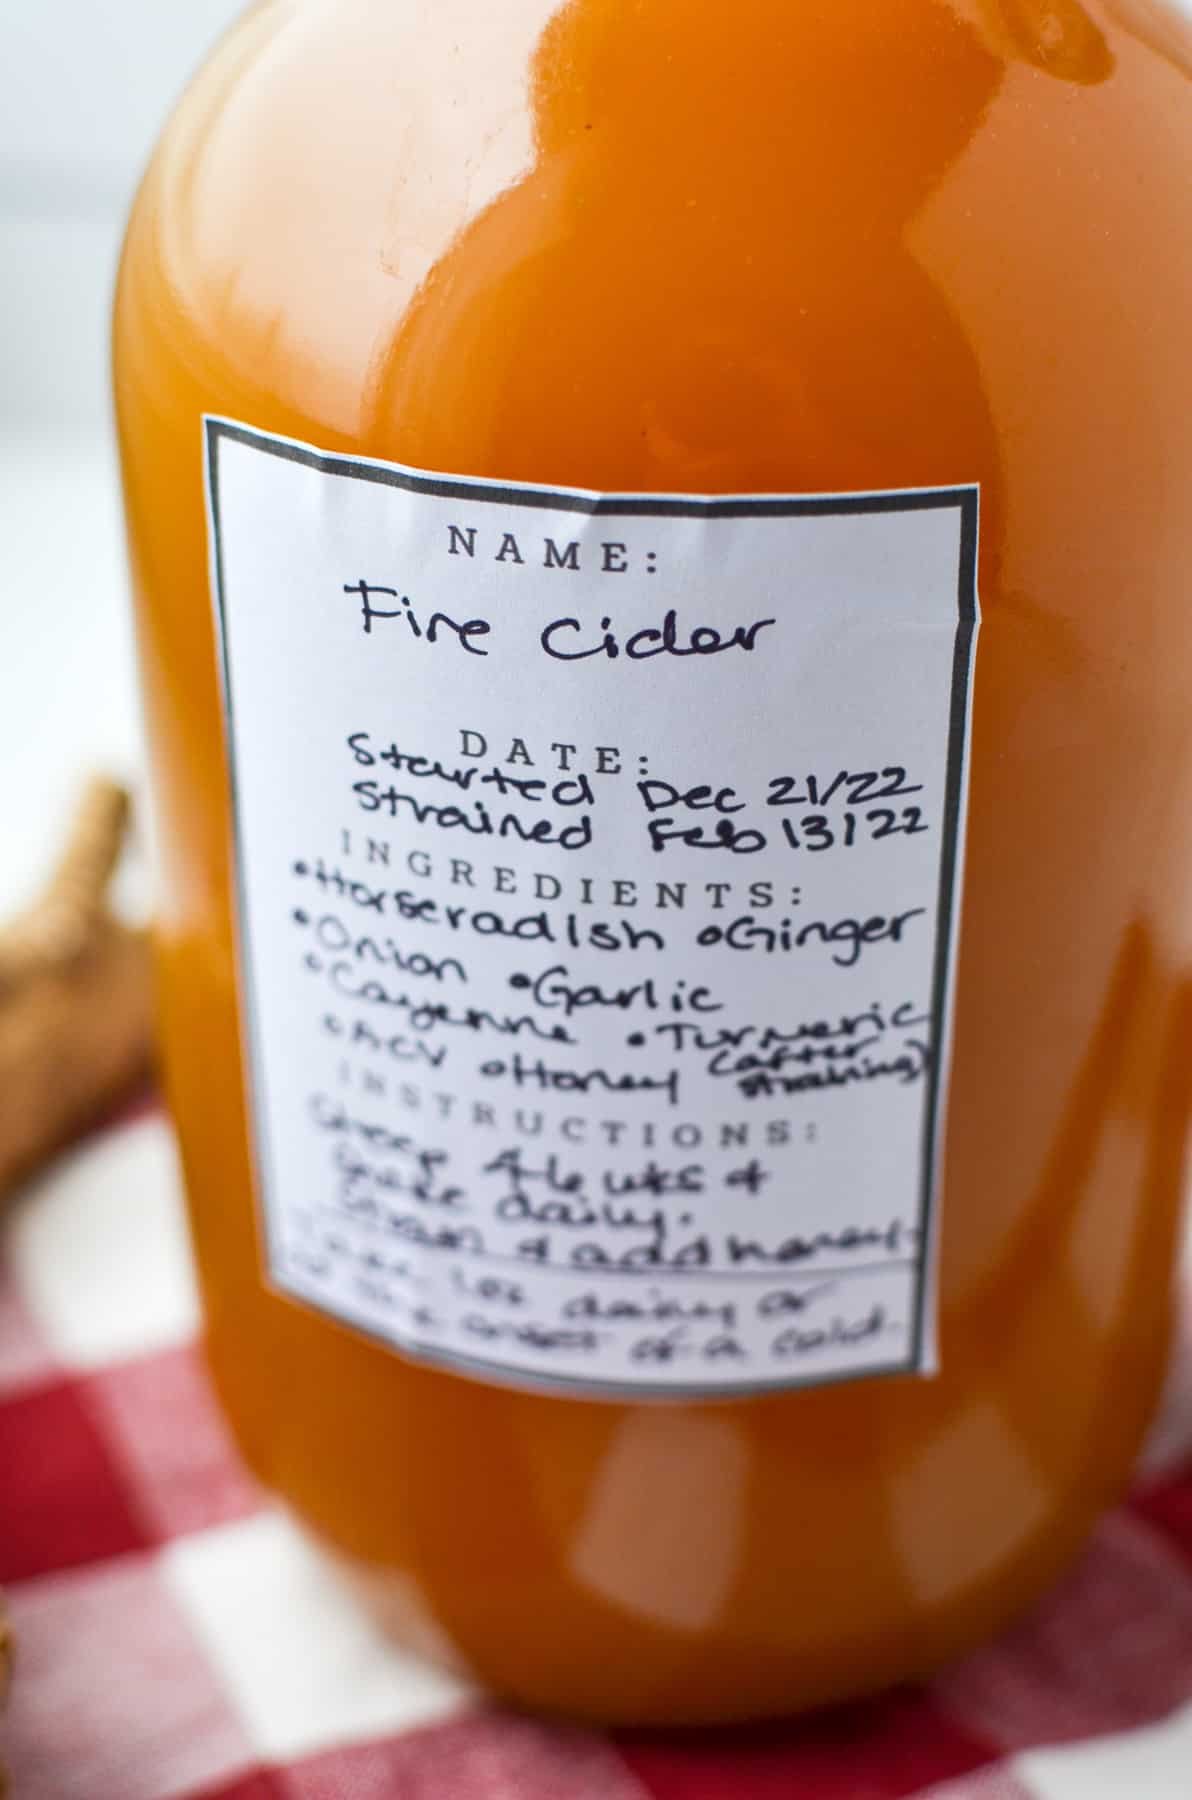 A close up of a label on a jar describing the contents as fire cider.